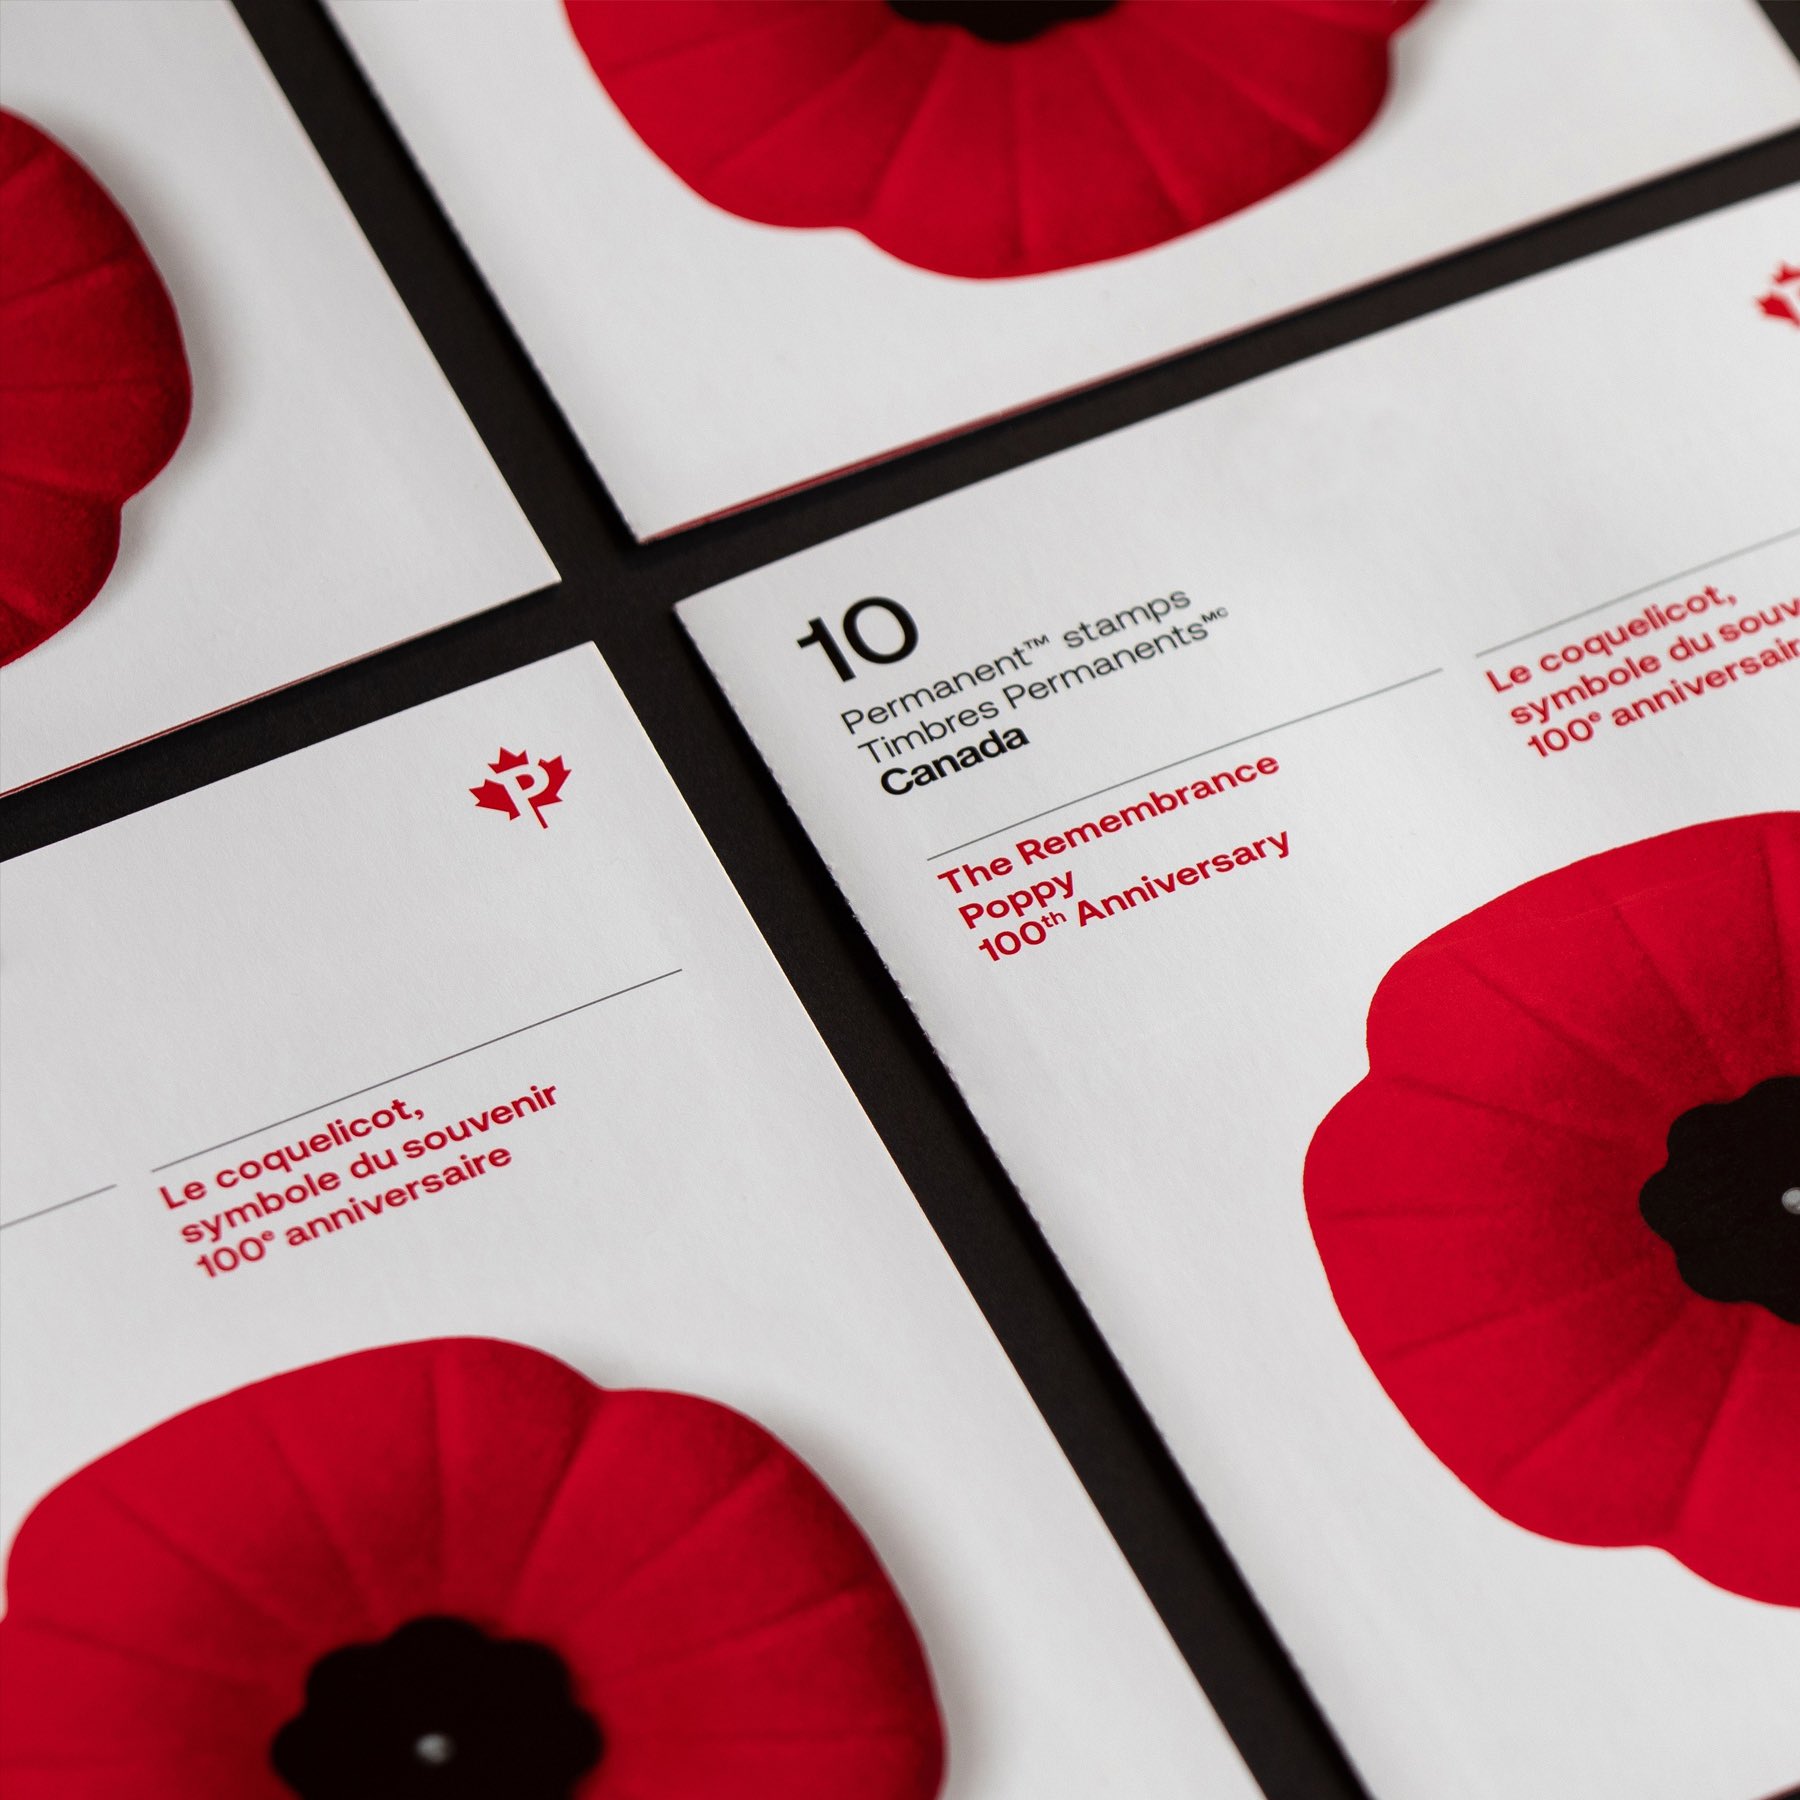 The Remembrance Poppy - Canada Postage Stamp